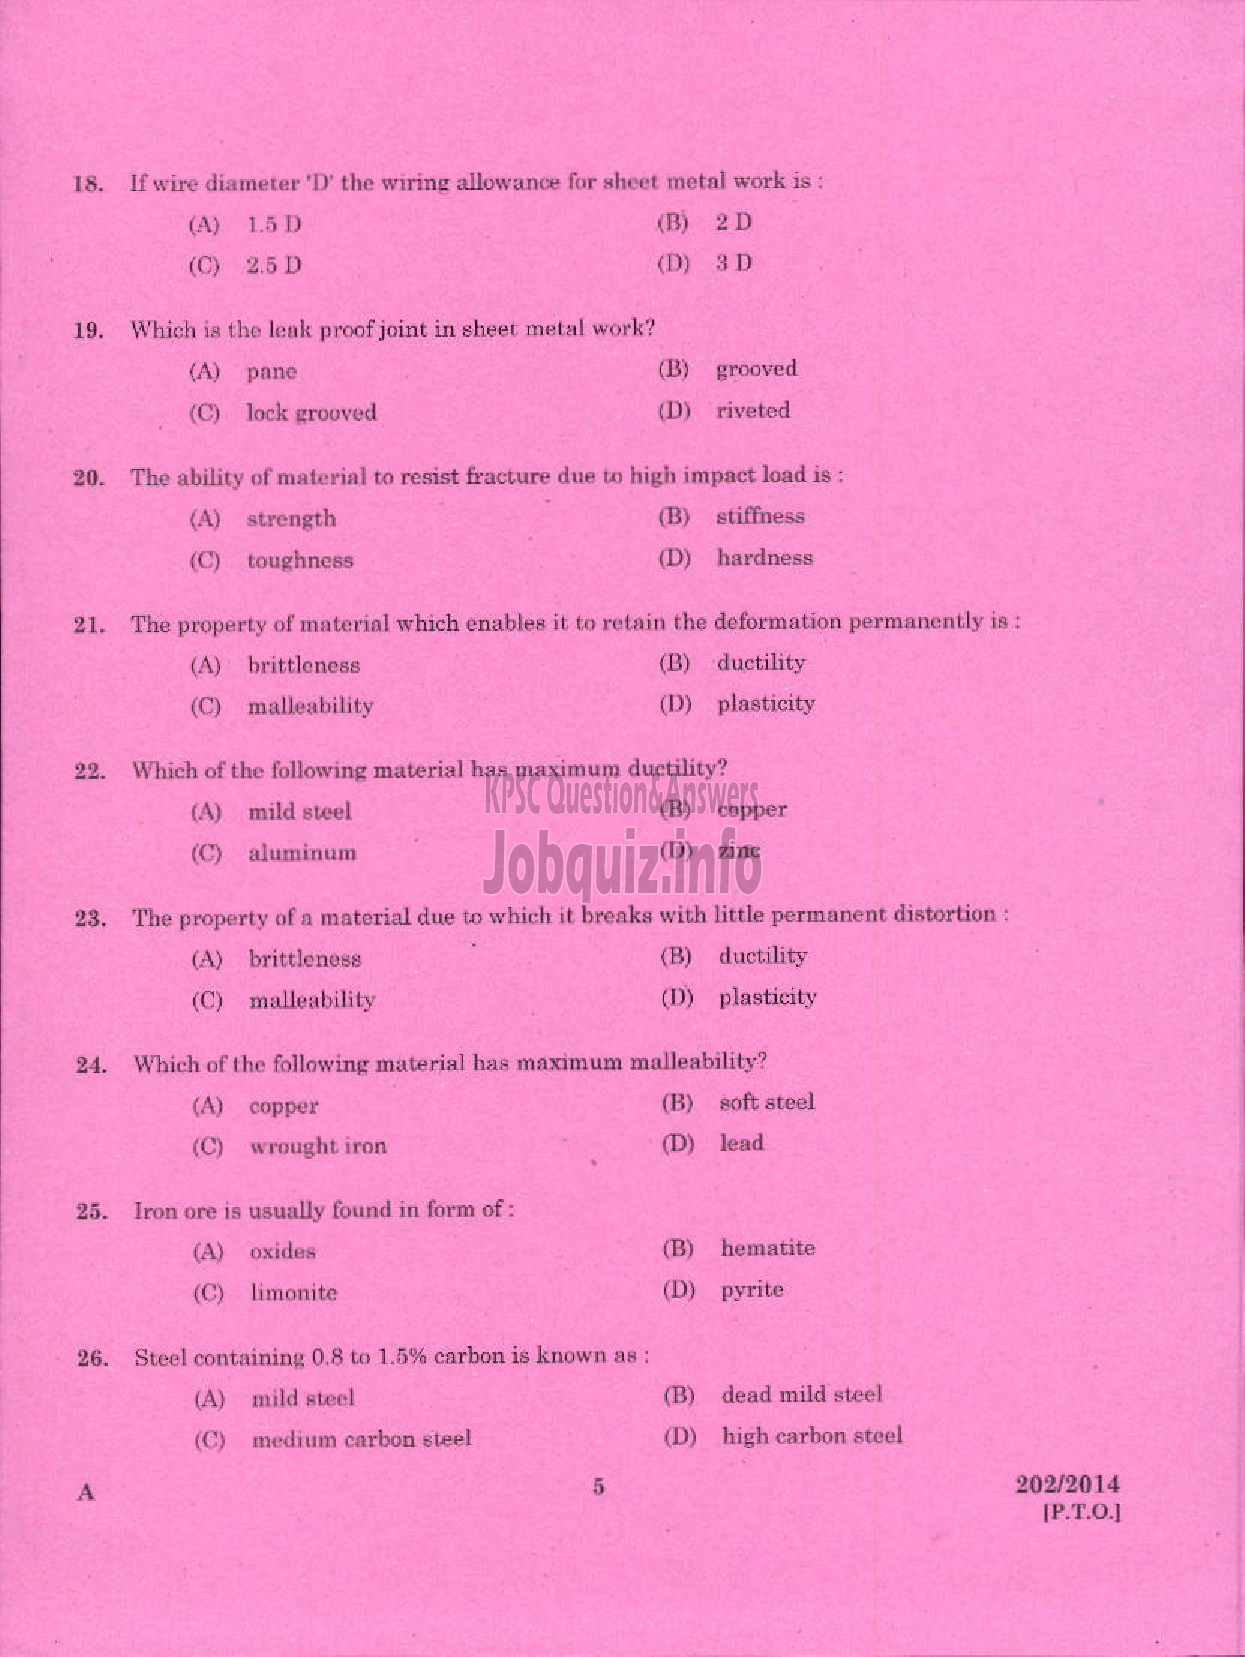 Kerala PSC Question Paper - TRADESMAN SHEET METAL ENGINEERING TECHNICAL EDUCATION TVM PTA IDK WYD AND KGD-3